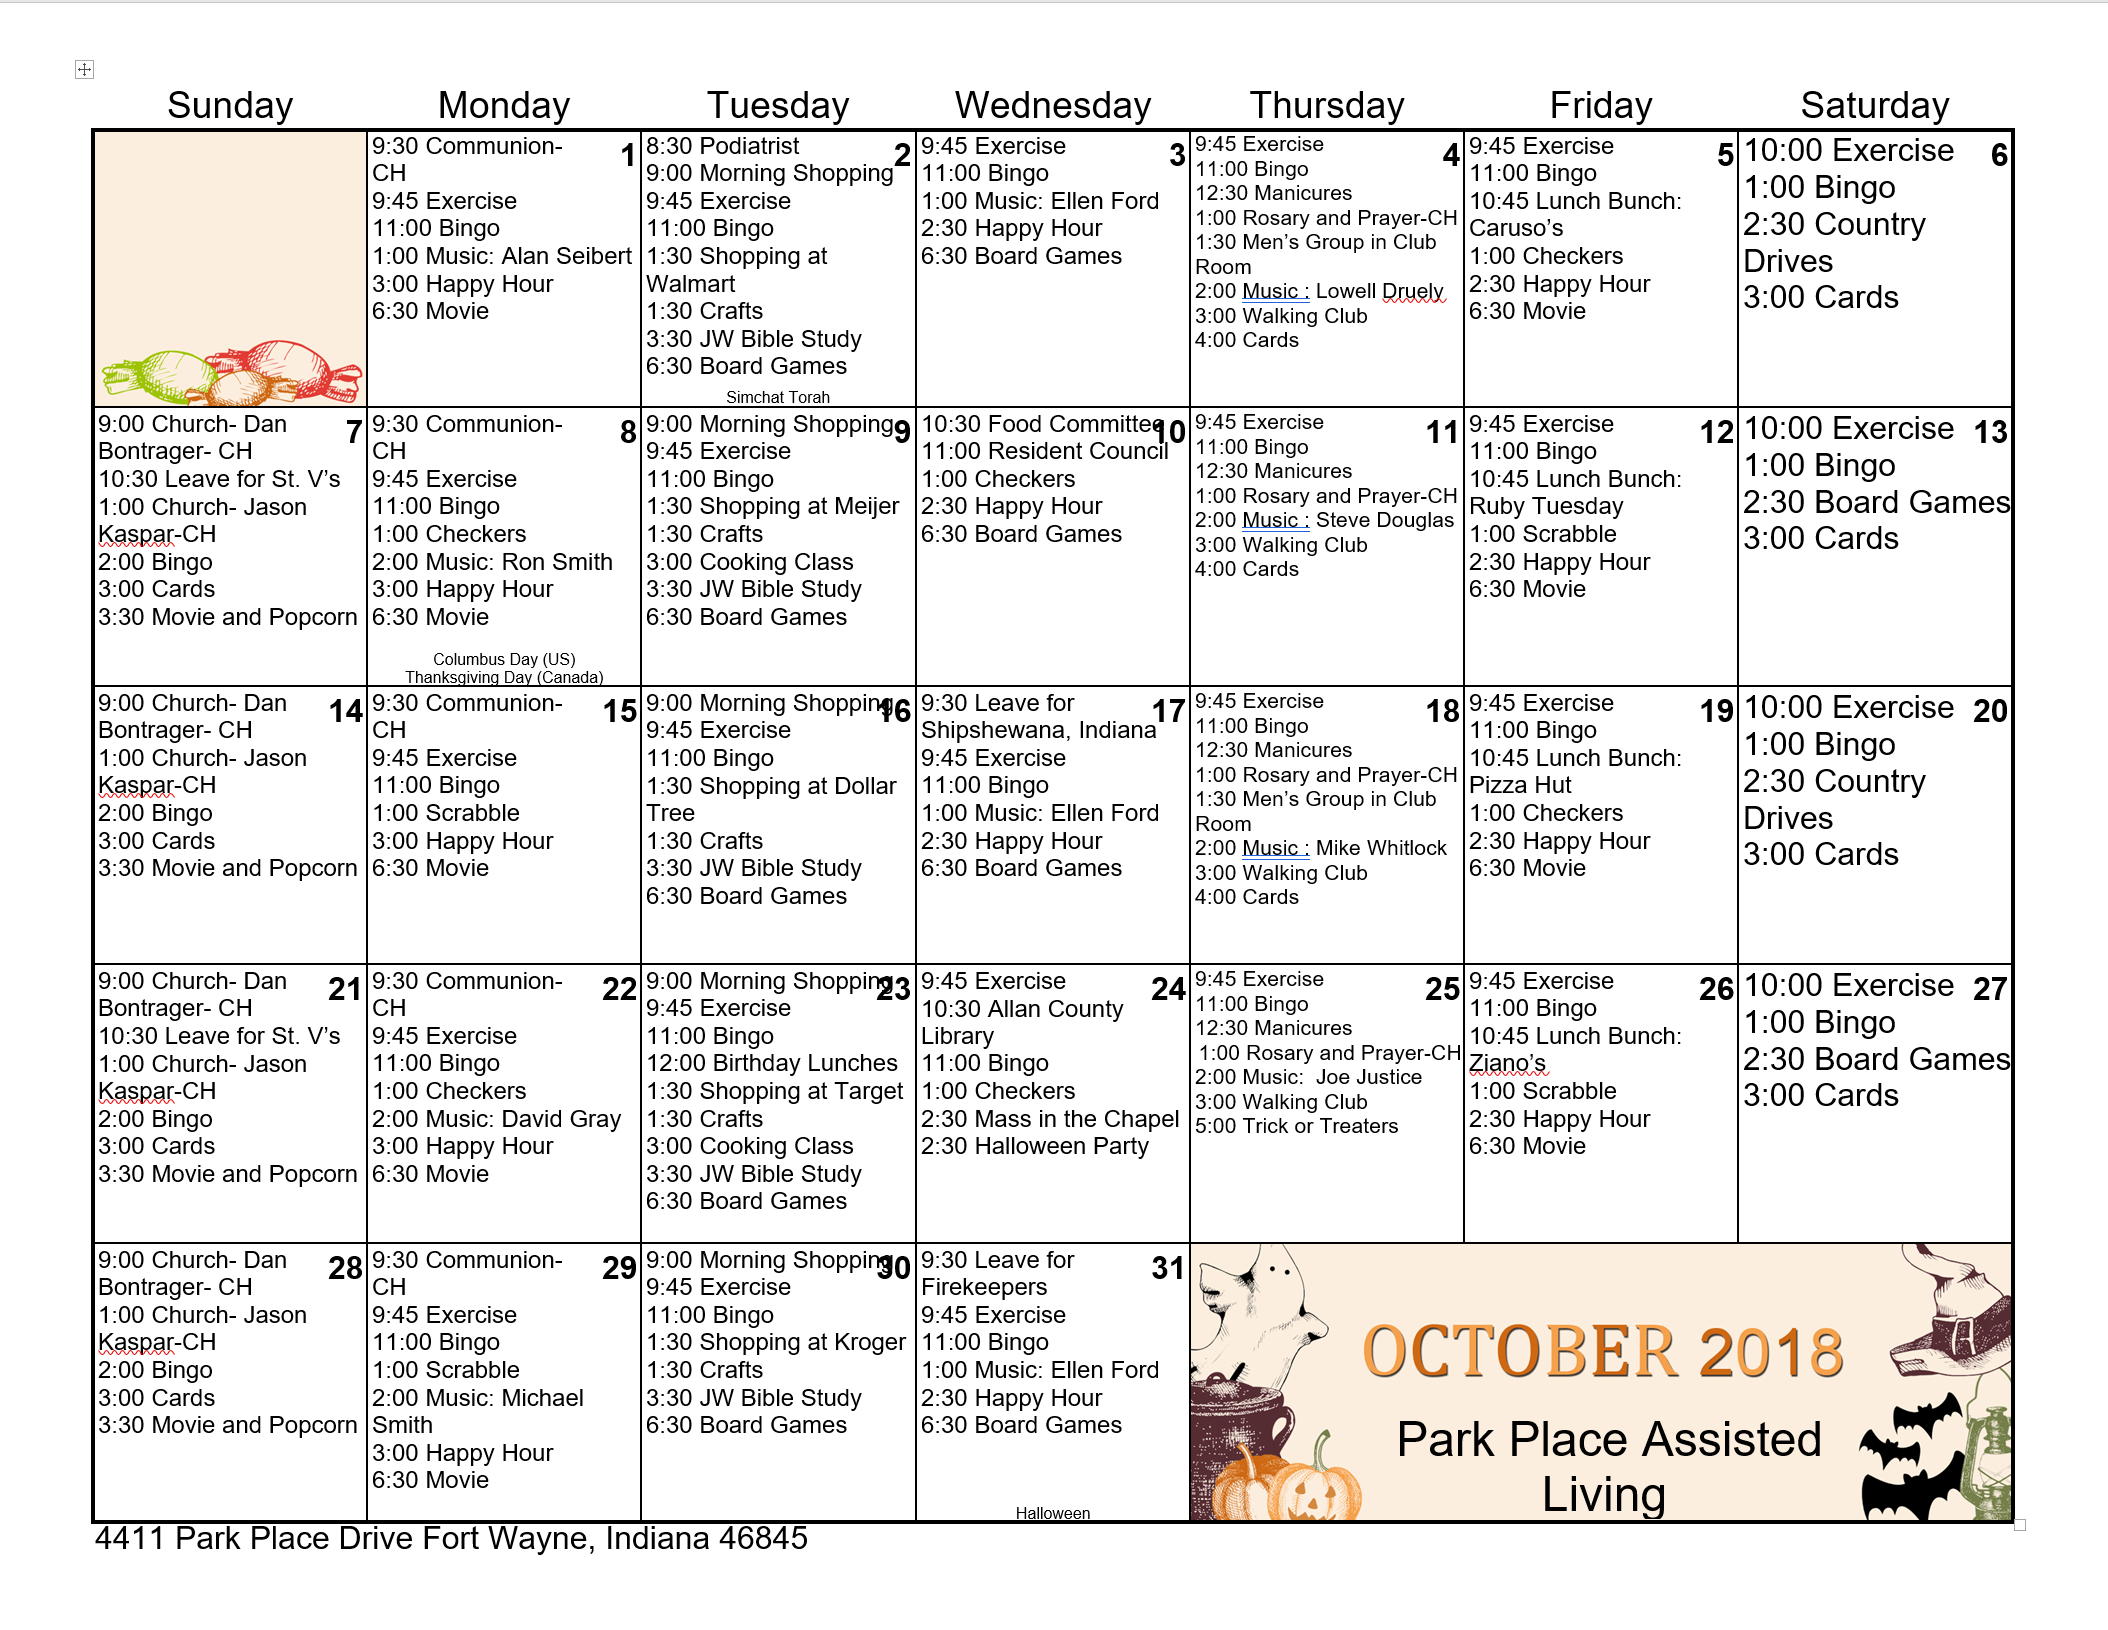 October Assisted Living Calendar 2018 Lebanon Traditions